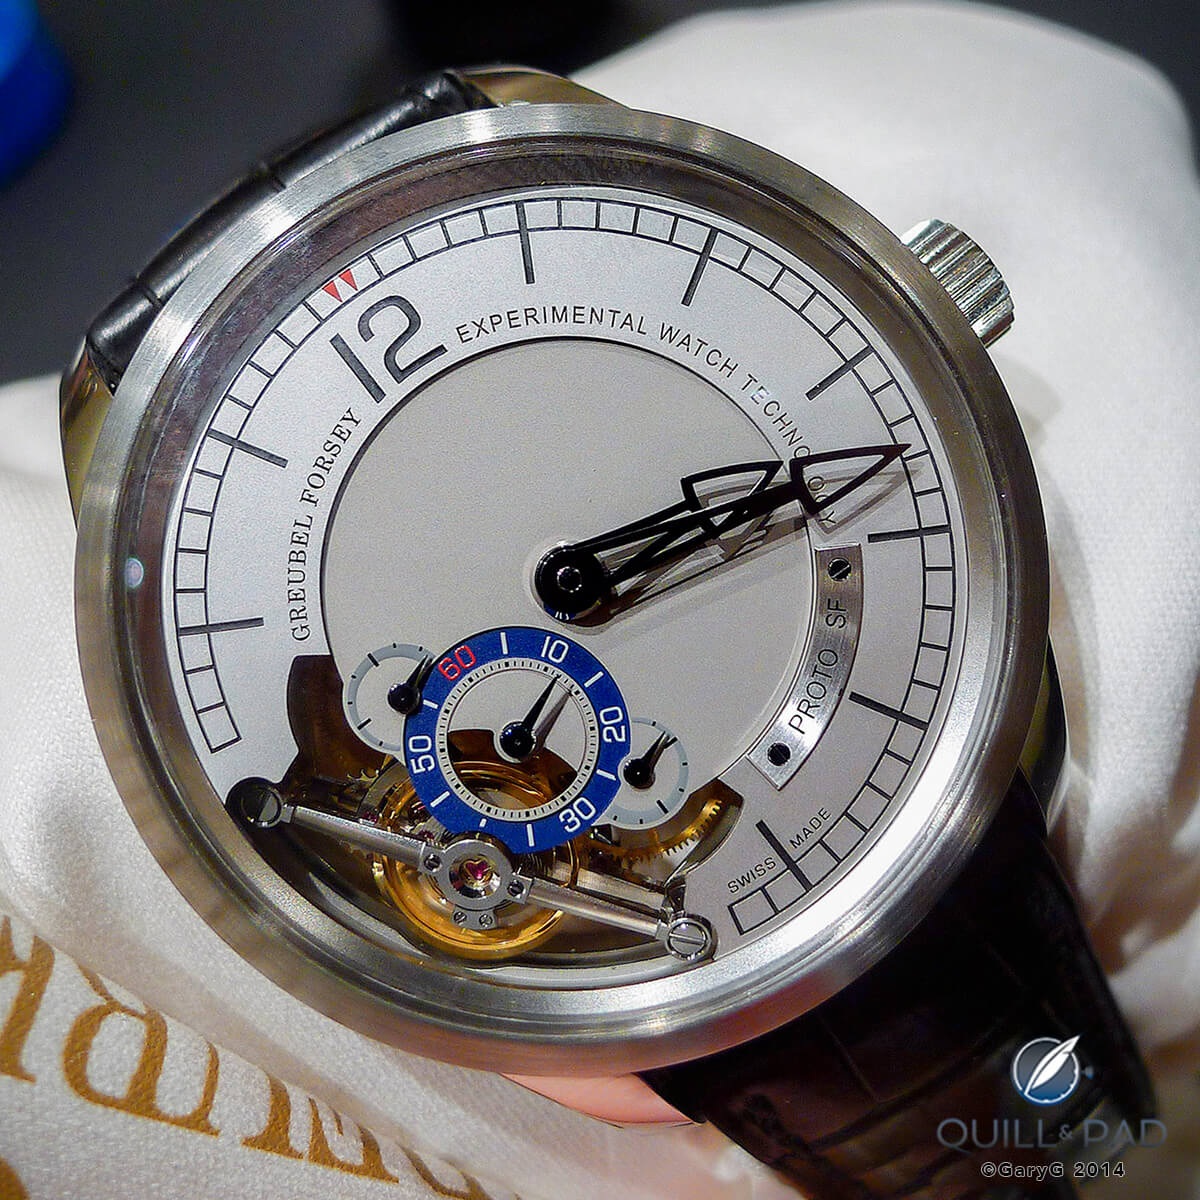 Stephen Forsey’s personal experimental prototype of the inclined double balances